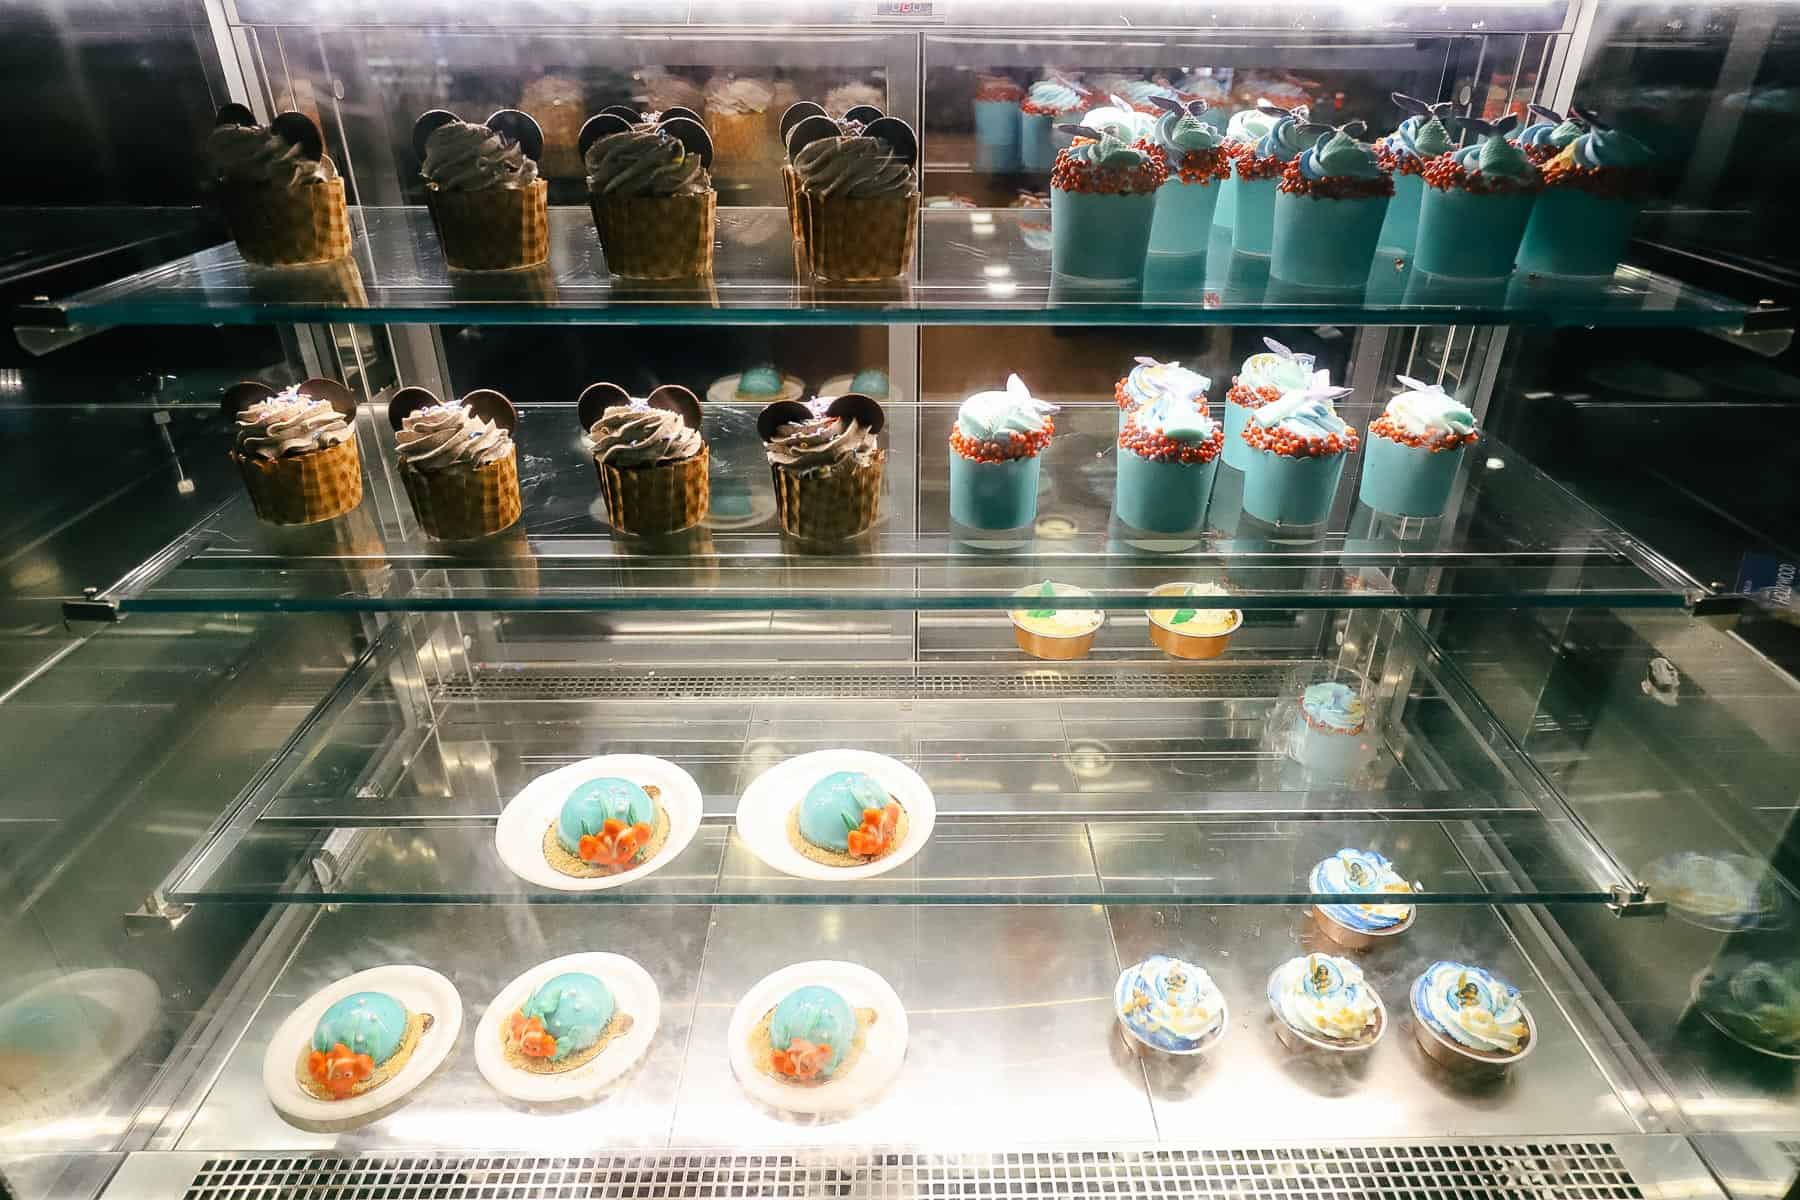 The Little Mermaid Cupcake and other desserts at Landscape of Flavors 